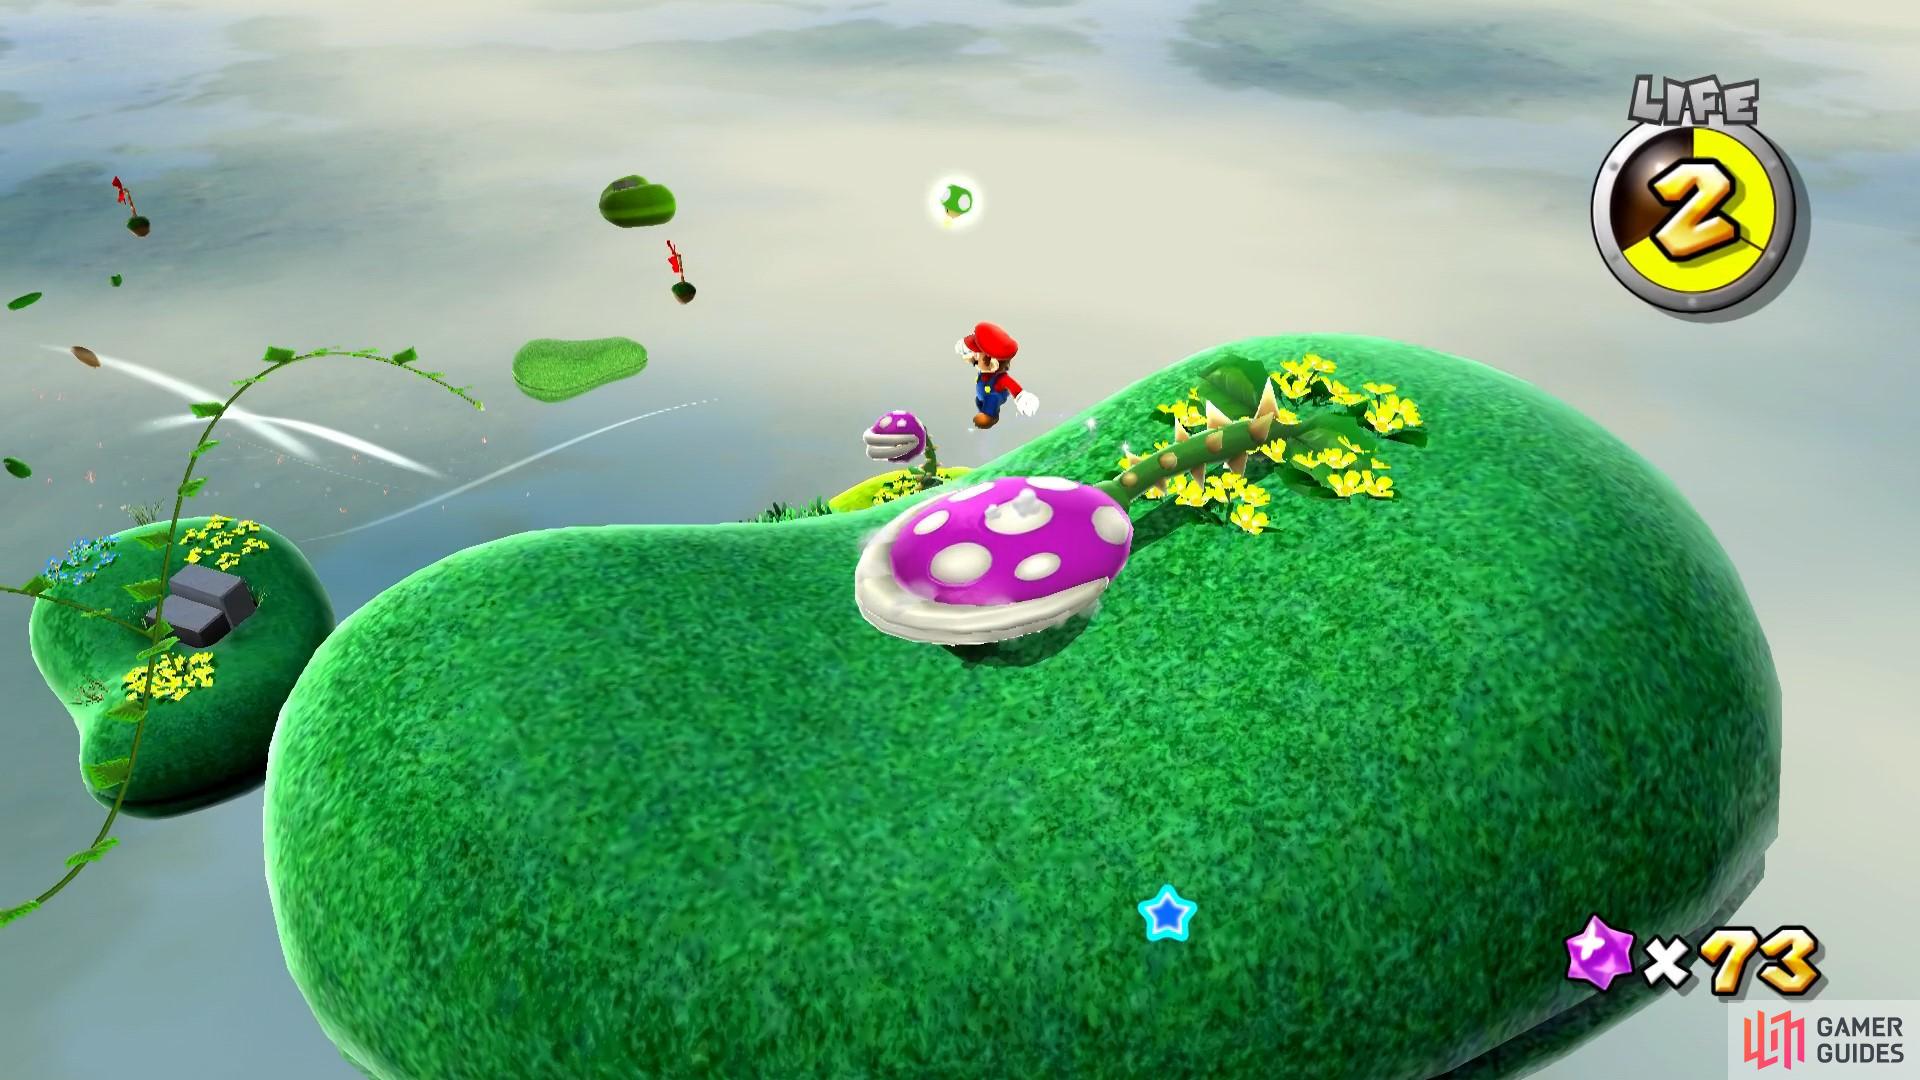 The Spiny Piranha Plant requires a bit of work to defeat it!